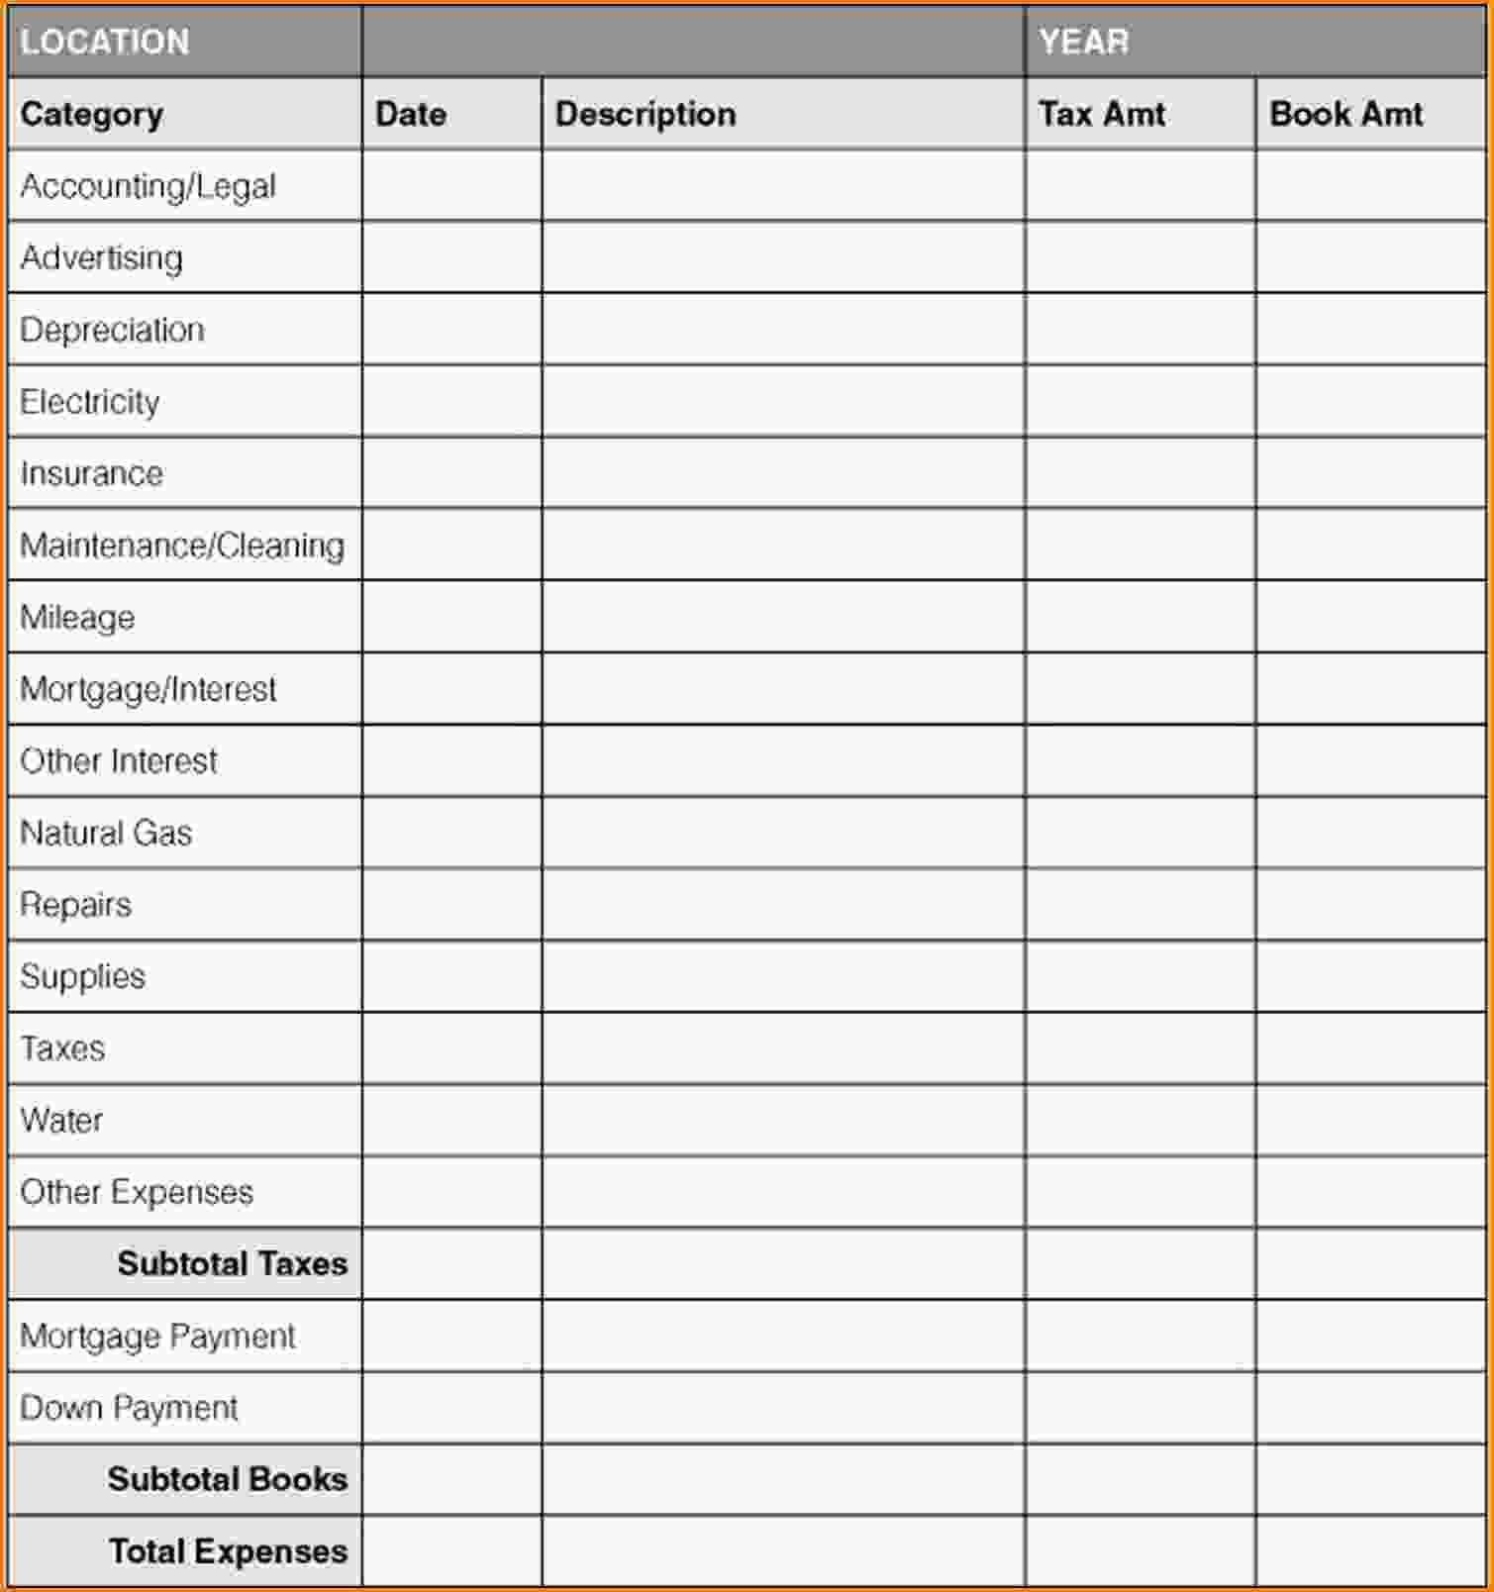 Excel Accounting Templates For Small Businesses Reference Excel For Small Business Accounting Intended For Bookkeeping Templates For Small Business Excel